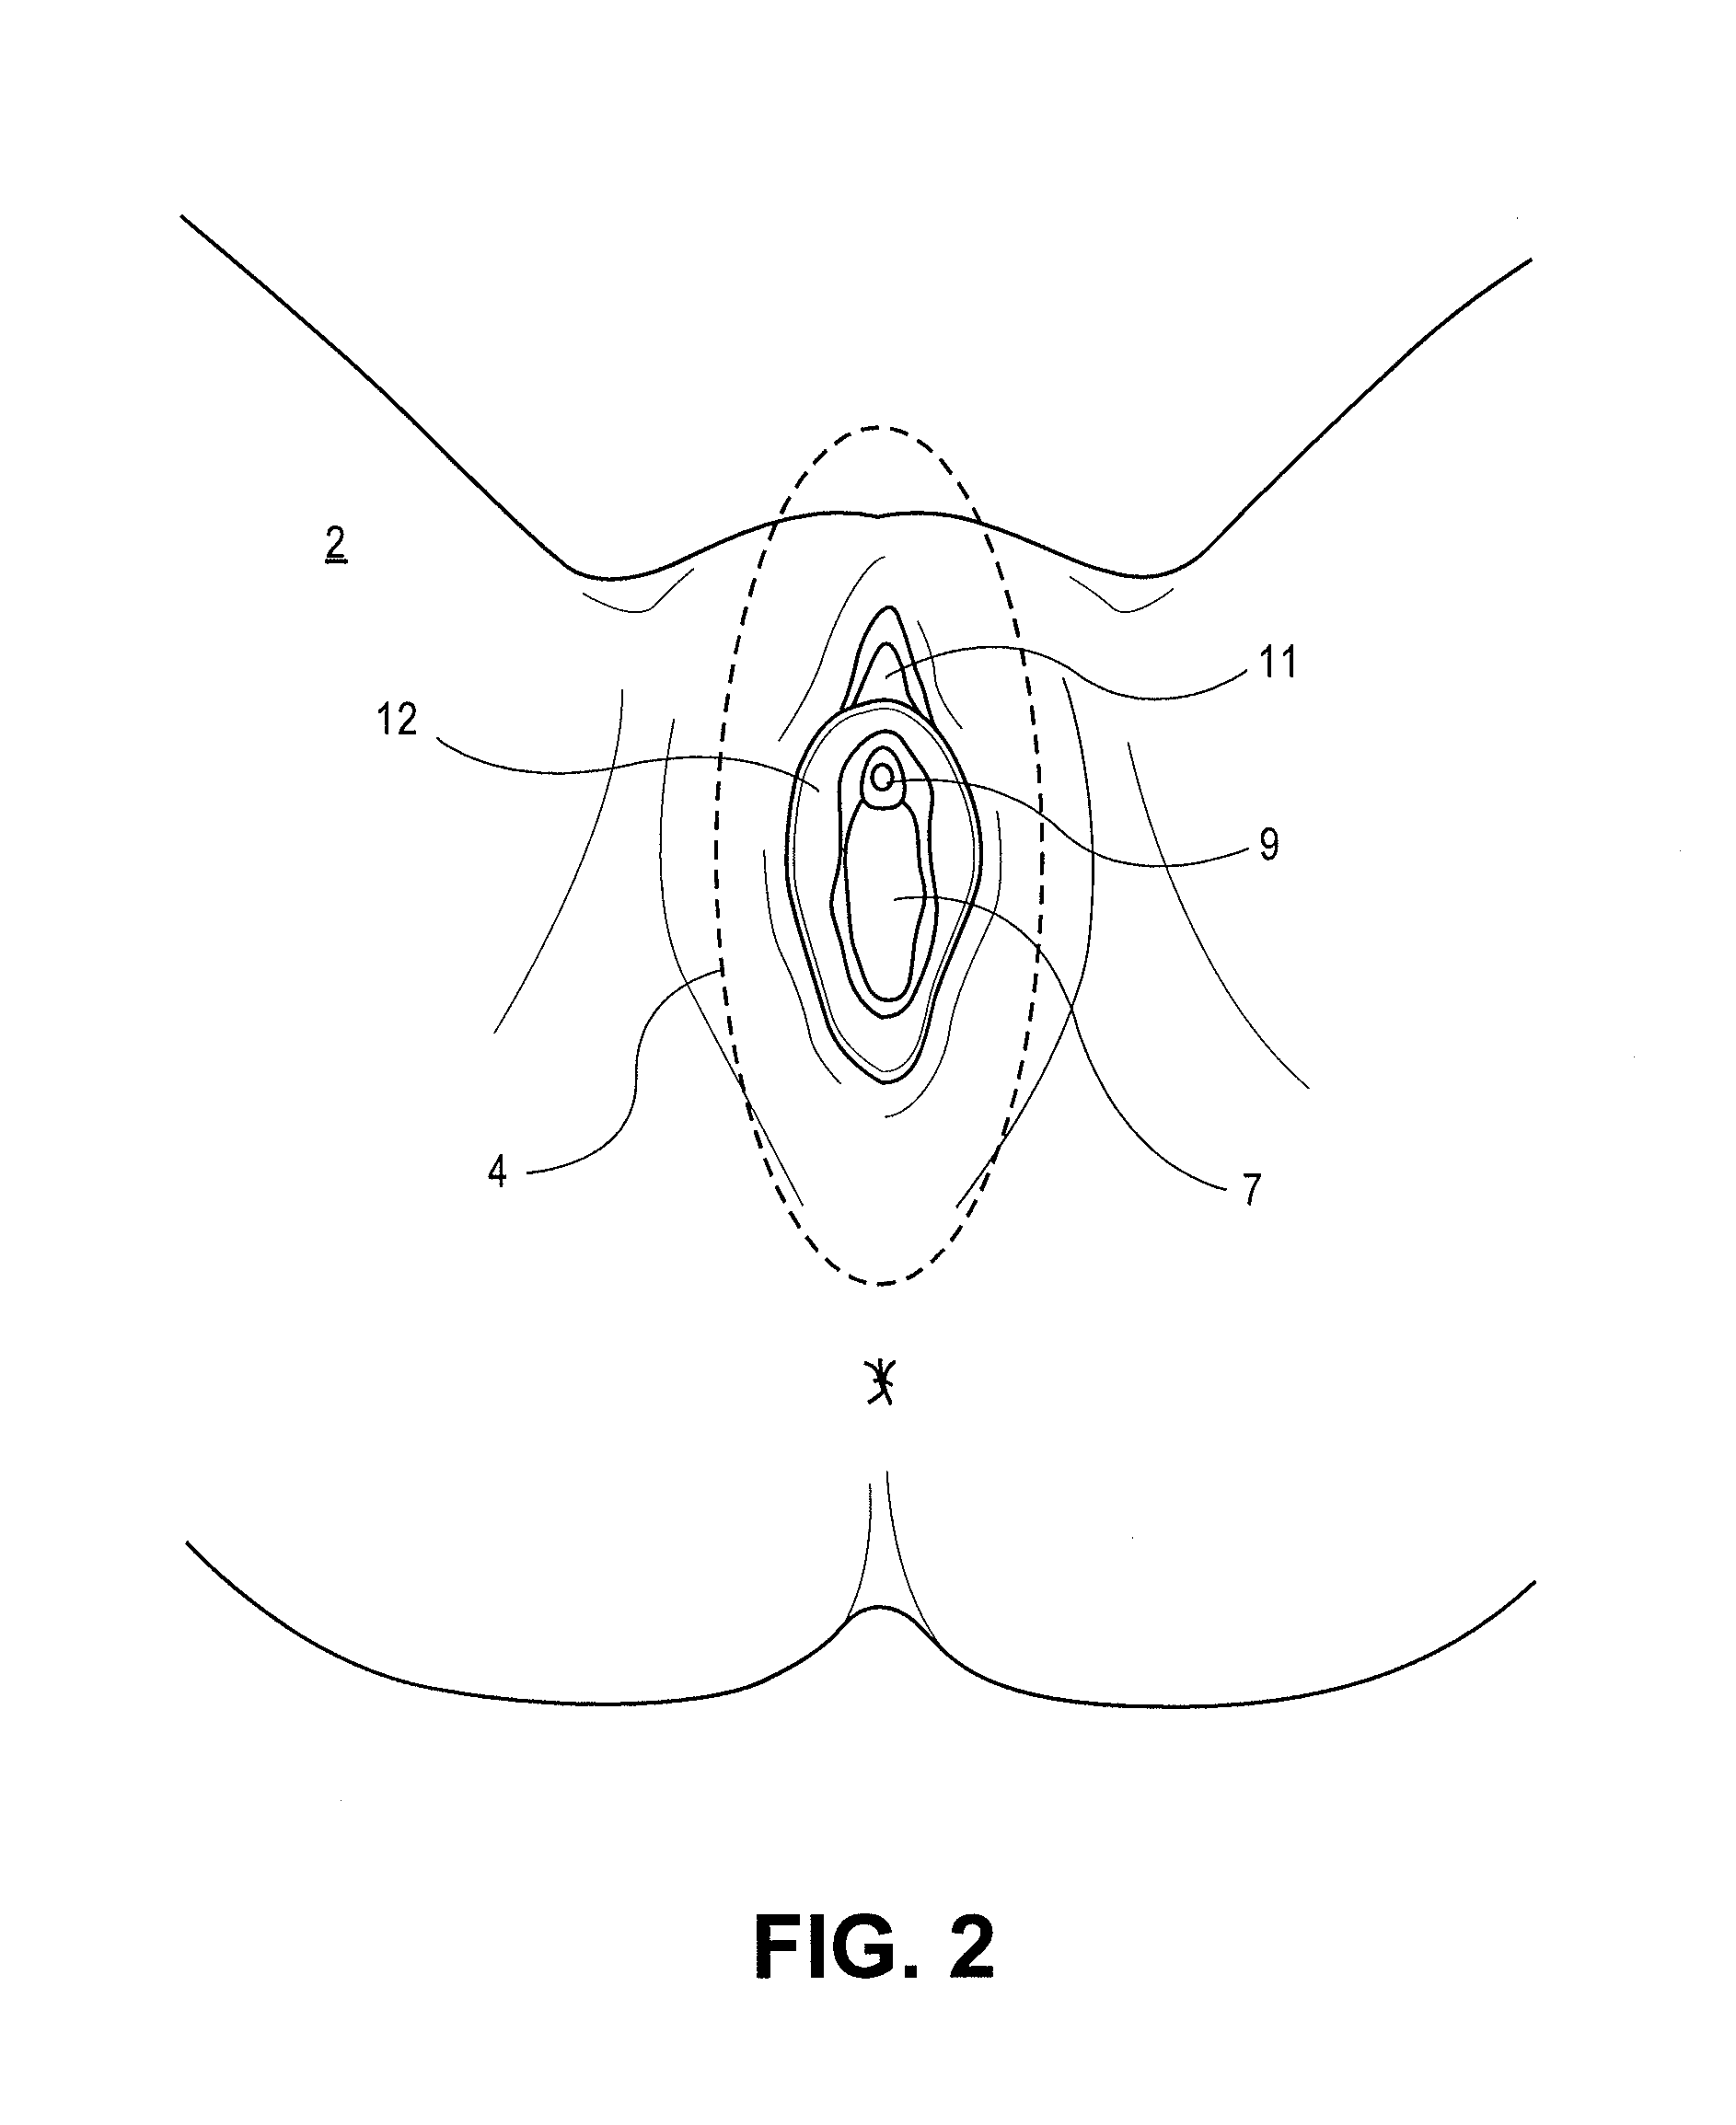 Device and method to treat vaginal atrophy